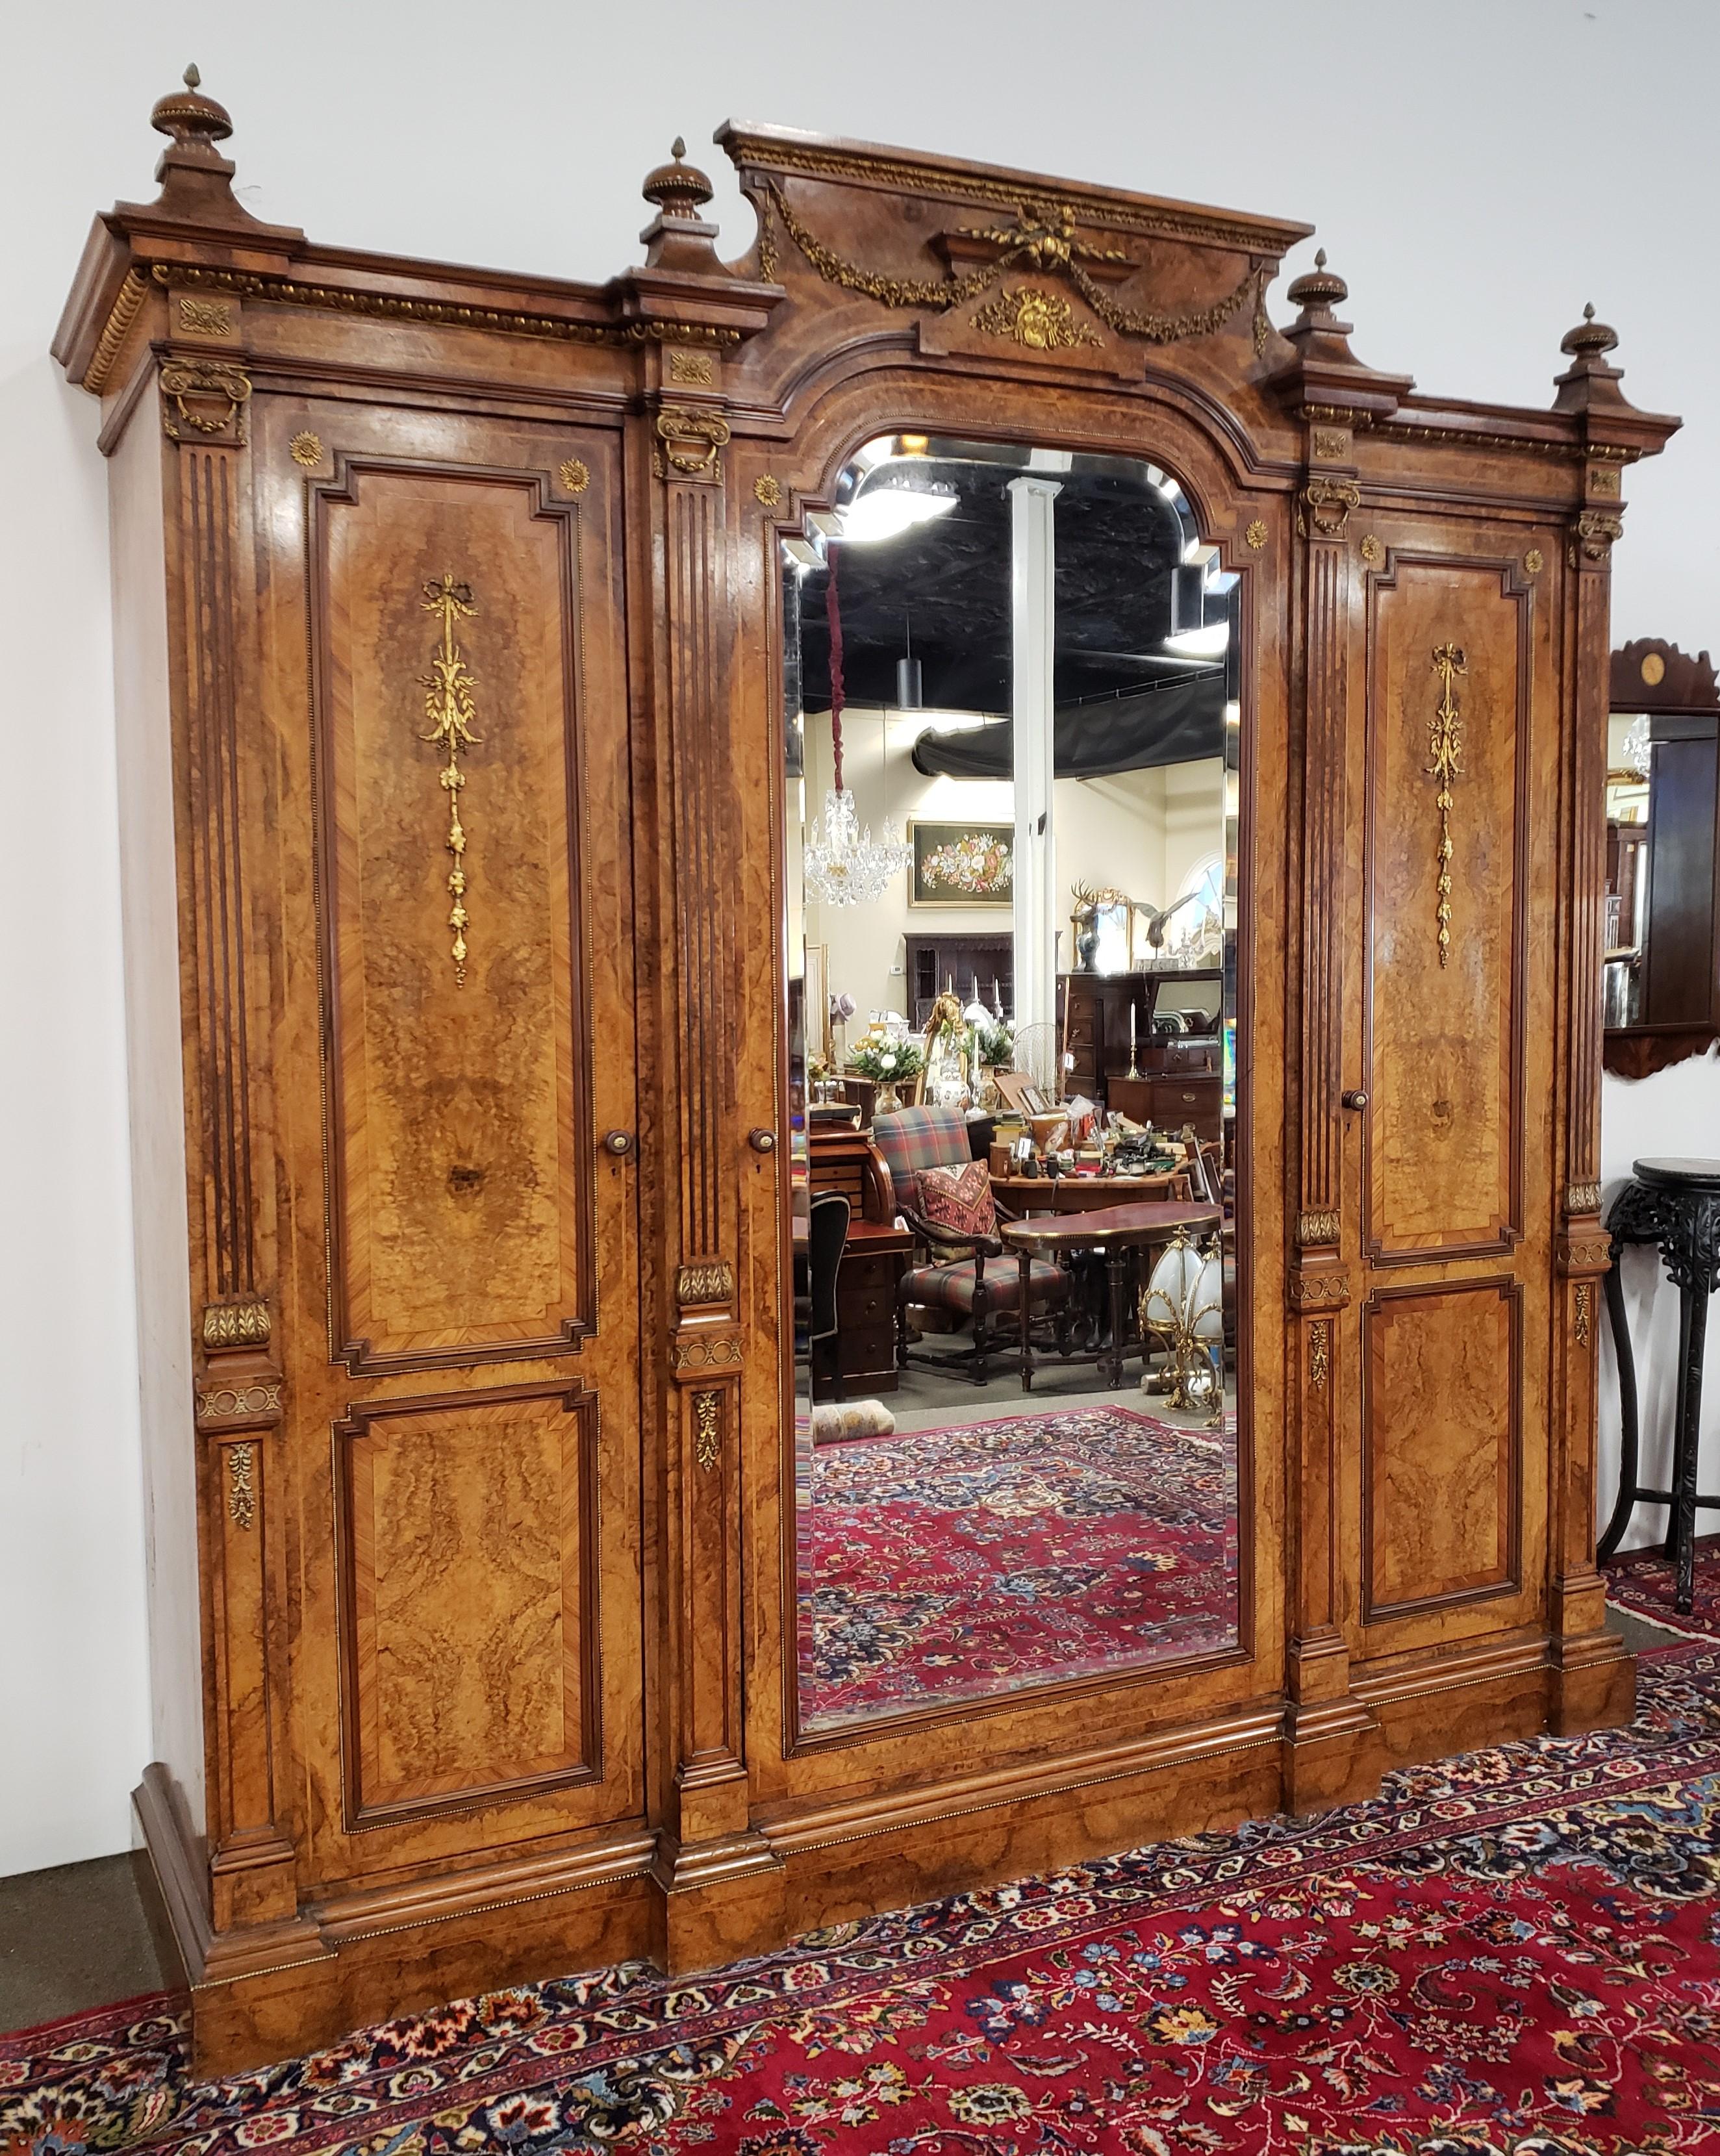 Victorian burl walnut armoire with crossbanding and satin wood inlay. This piece features a large mirrored door in the center. When opened it reveals a linen press century displaying an interior with slide out trays and 3 drawers. The left and right